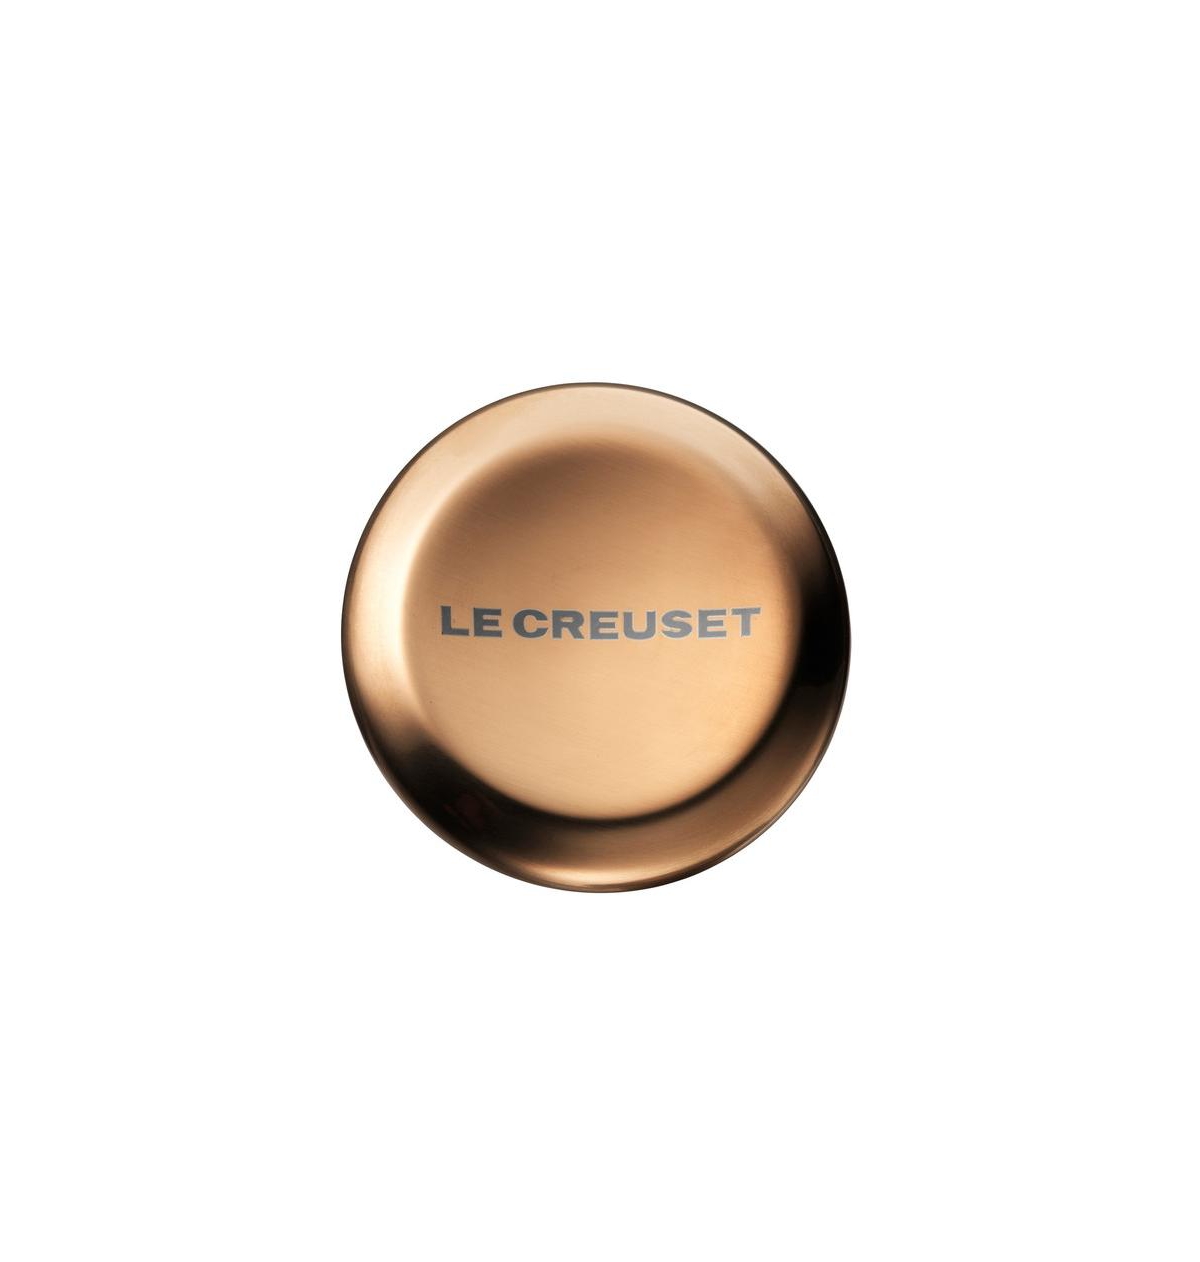 Le Creuset Signature Small Copper Knob For Cast Iron In N,a